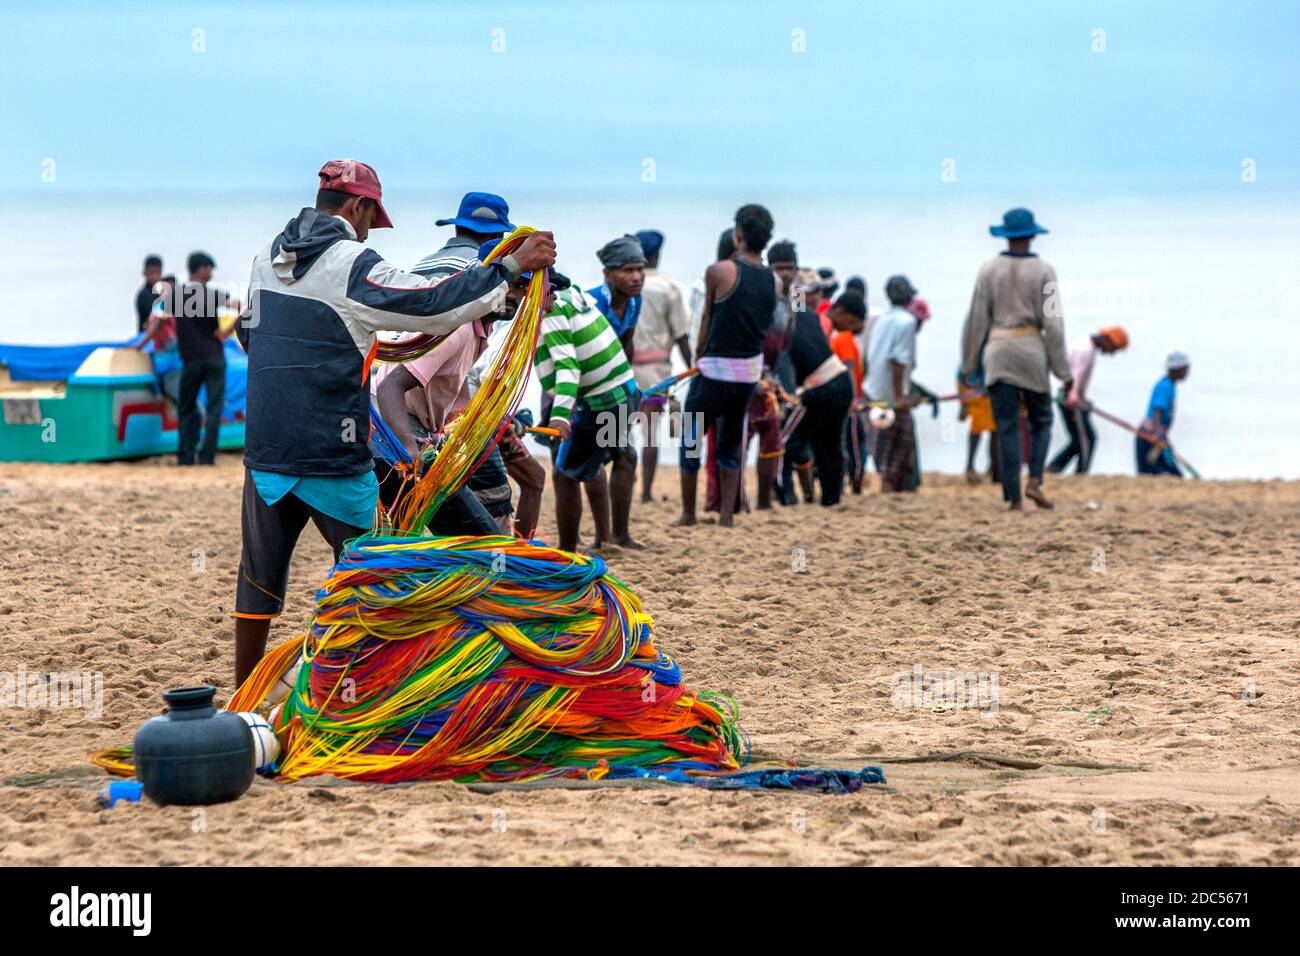 Beach seine fishermen pull the colourful rope attached to their